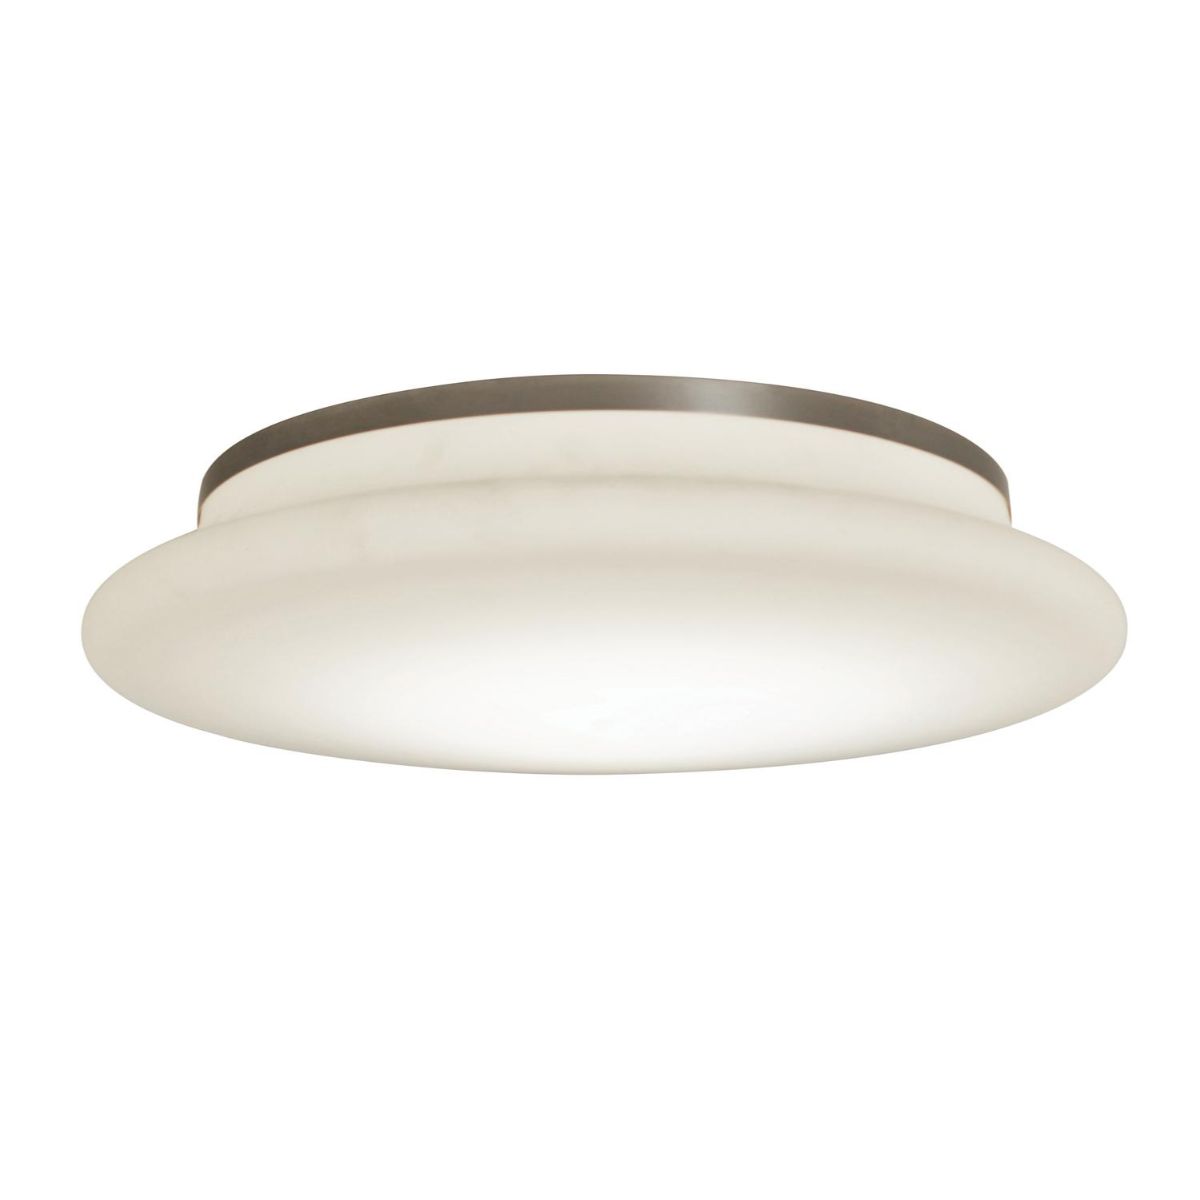 Sutton 18 in. LED Flush Mount Light with Motion Sensor Selectable CCT Satin Nickel Finish - Bees Lighting